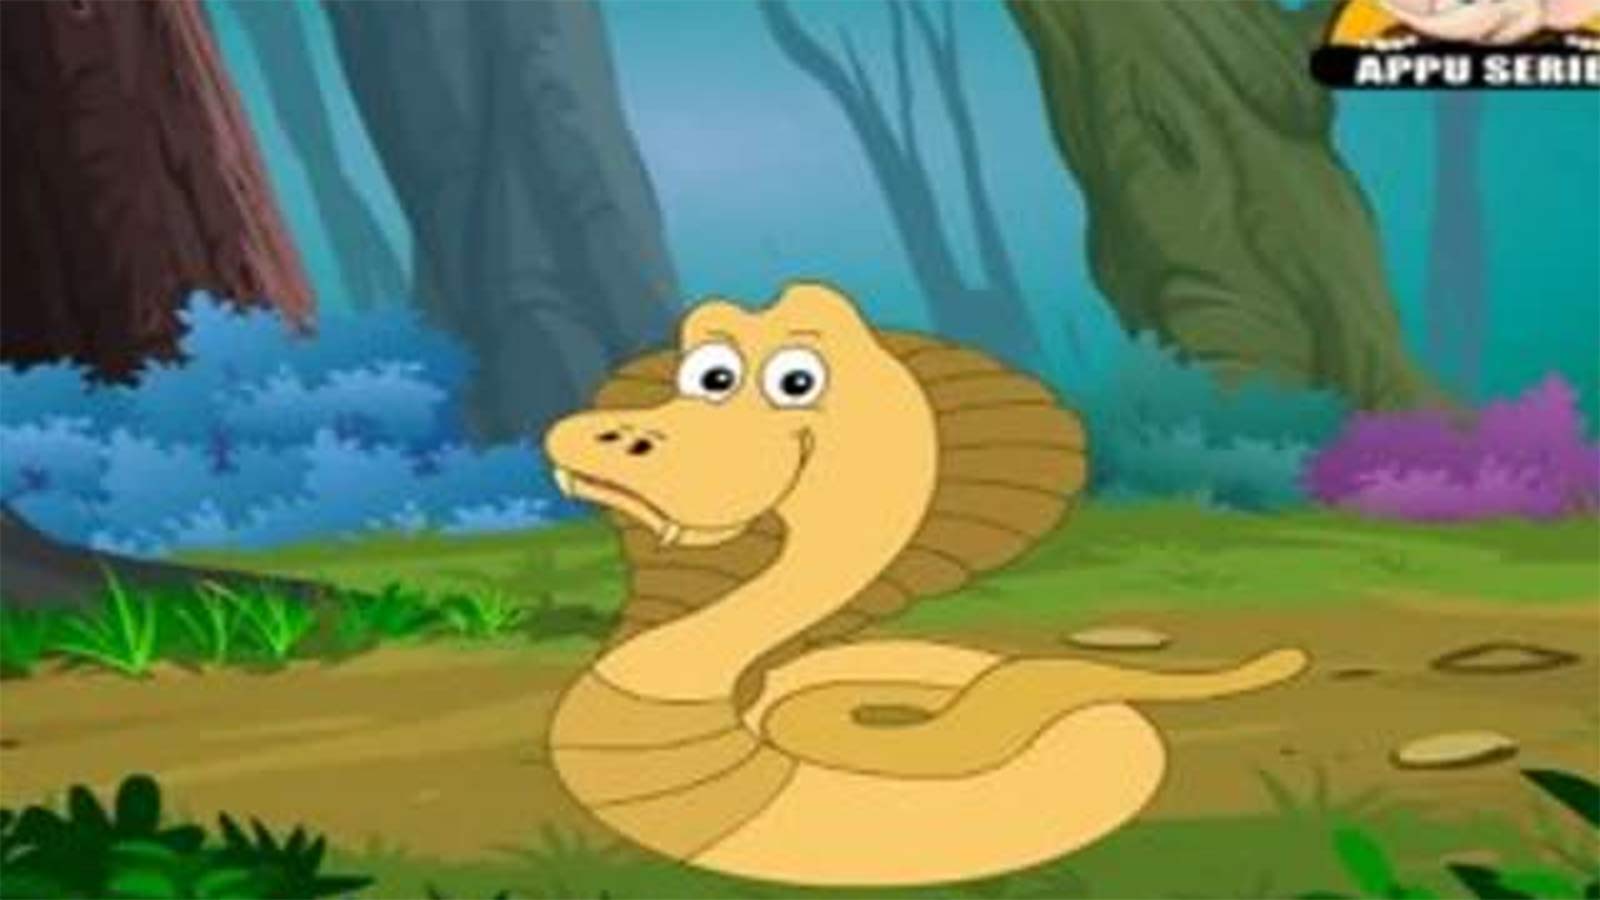 Kids Learning Video In Marathi 'Animal Sounds 'Cobra' - Learning Video In  Marathi | Entertainment - Times of India Videos